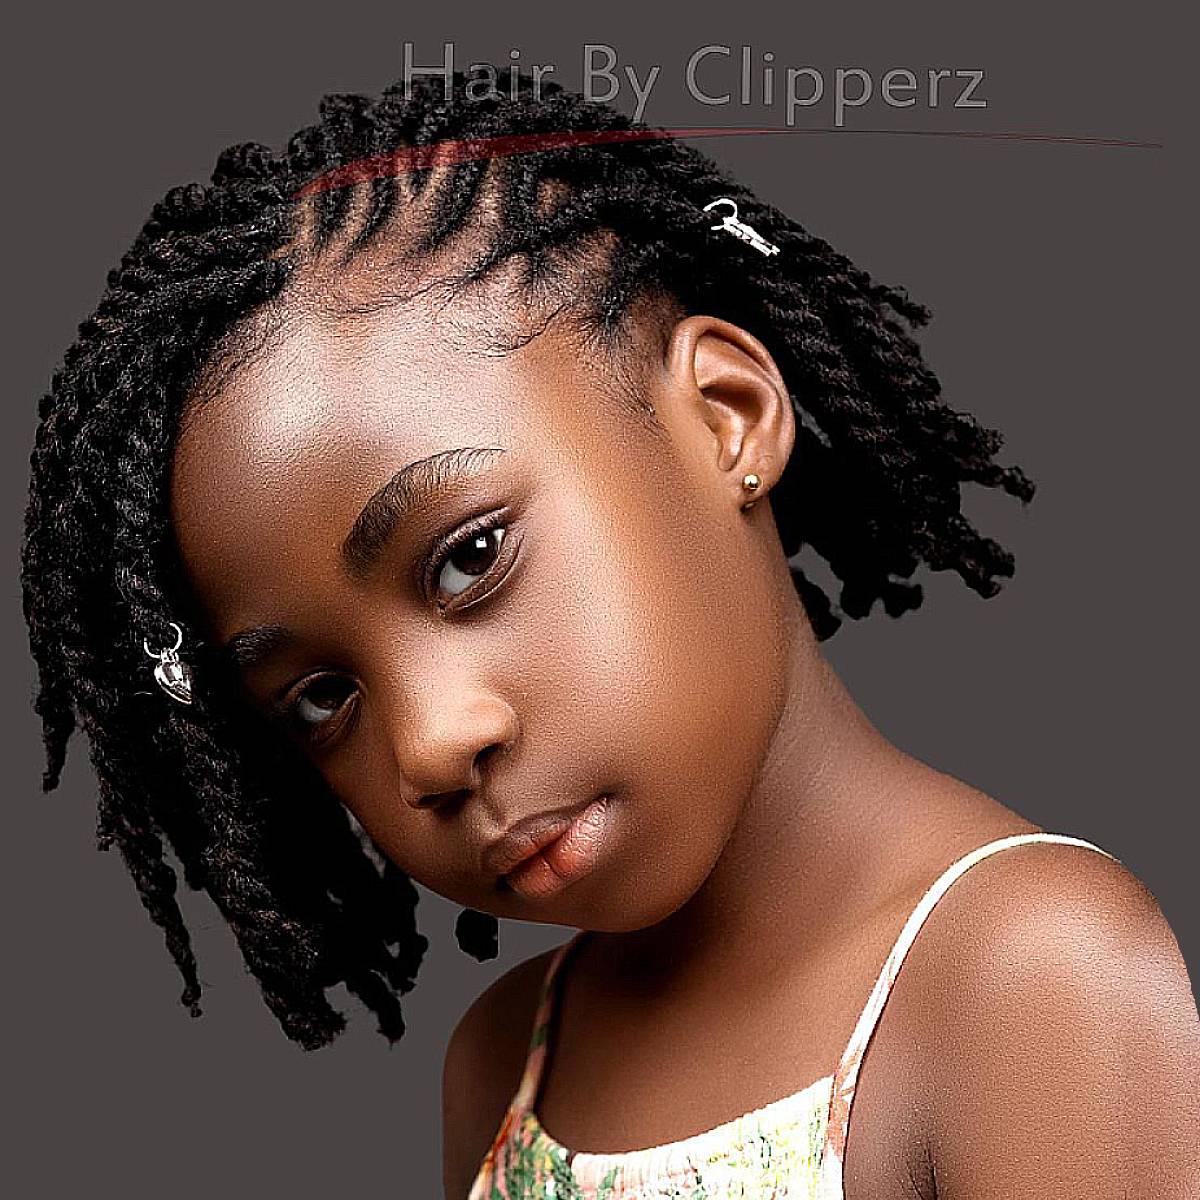 59 Legendary Hairstyles with Beads for Little Girls - Curly Craze